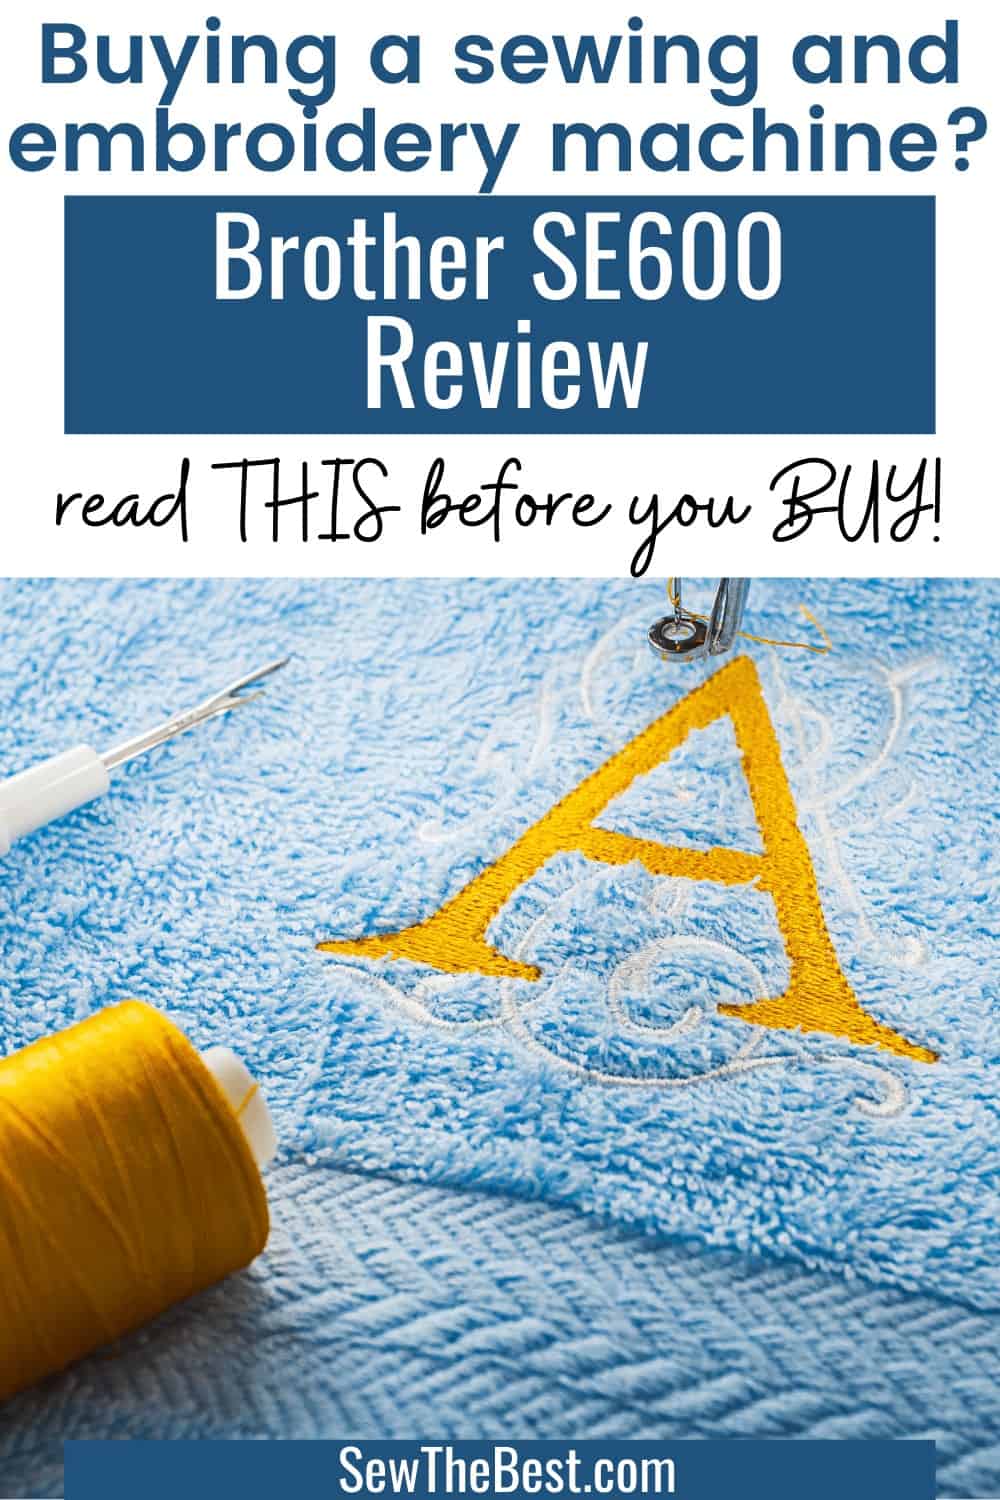 Buying a sewing and embroidery machine? Brother SE600 review. Read this before you buy! #SewingMachine #sewing #brotherSewingMachine #AD #EmbroideryMachine